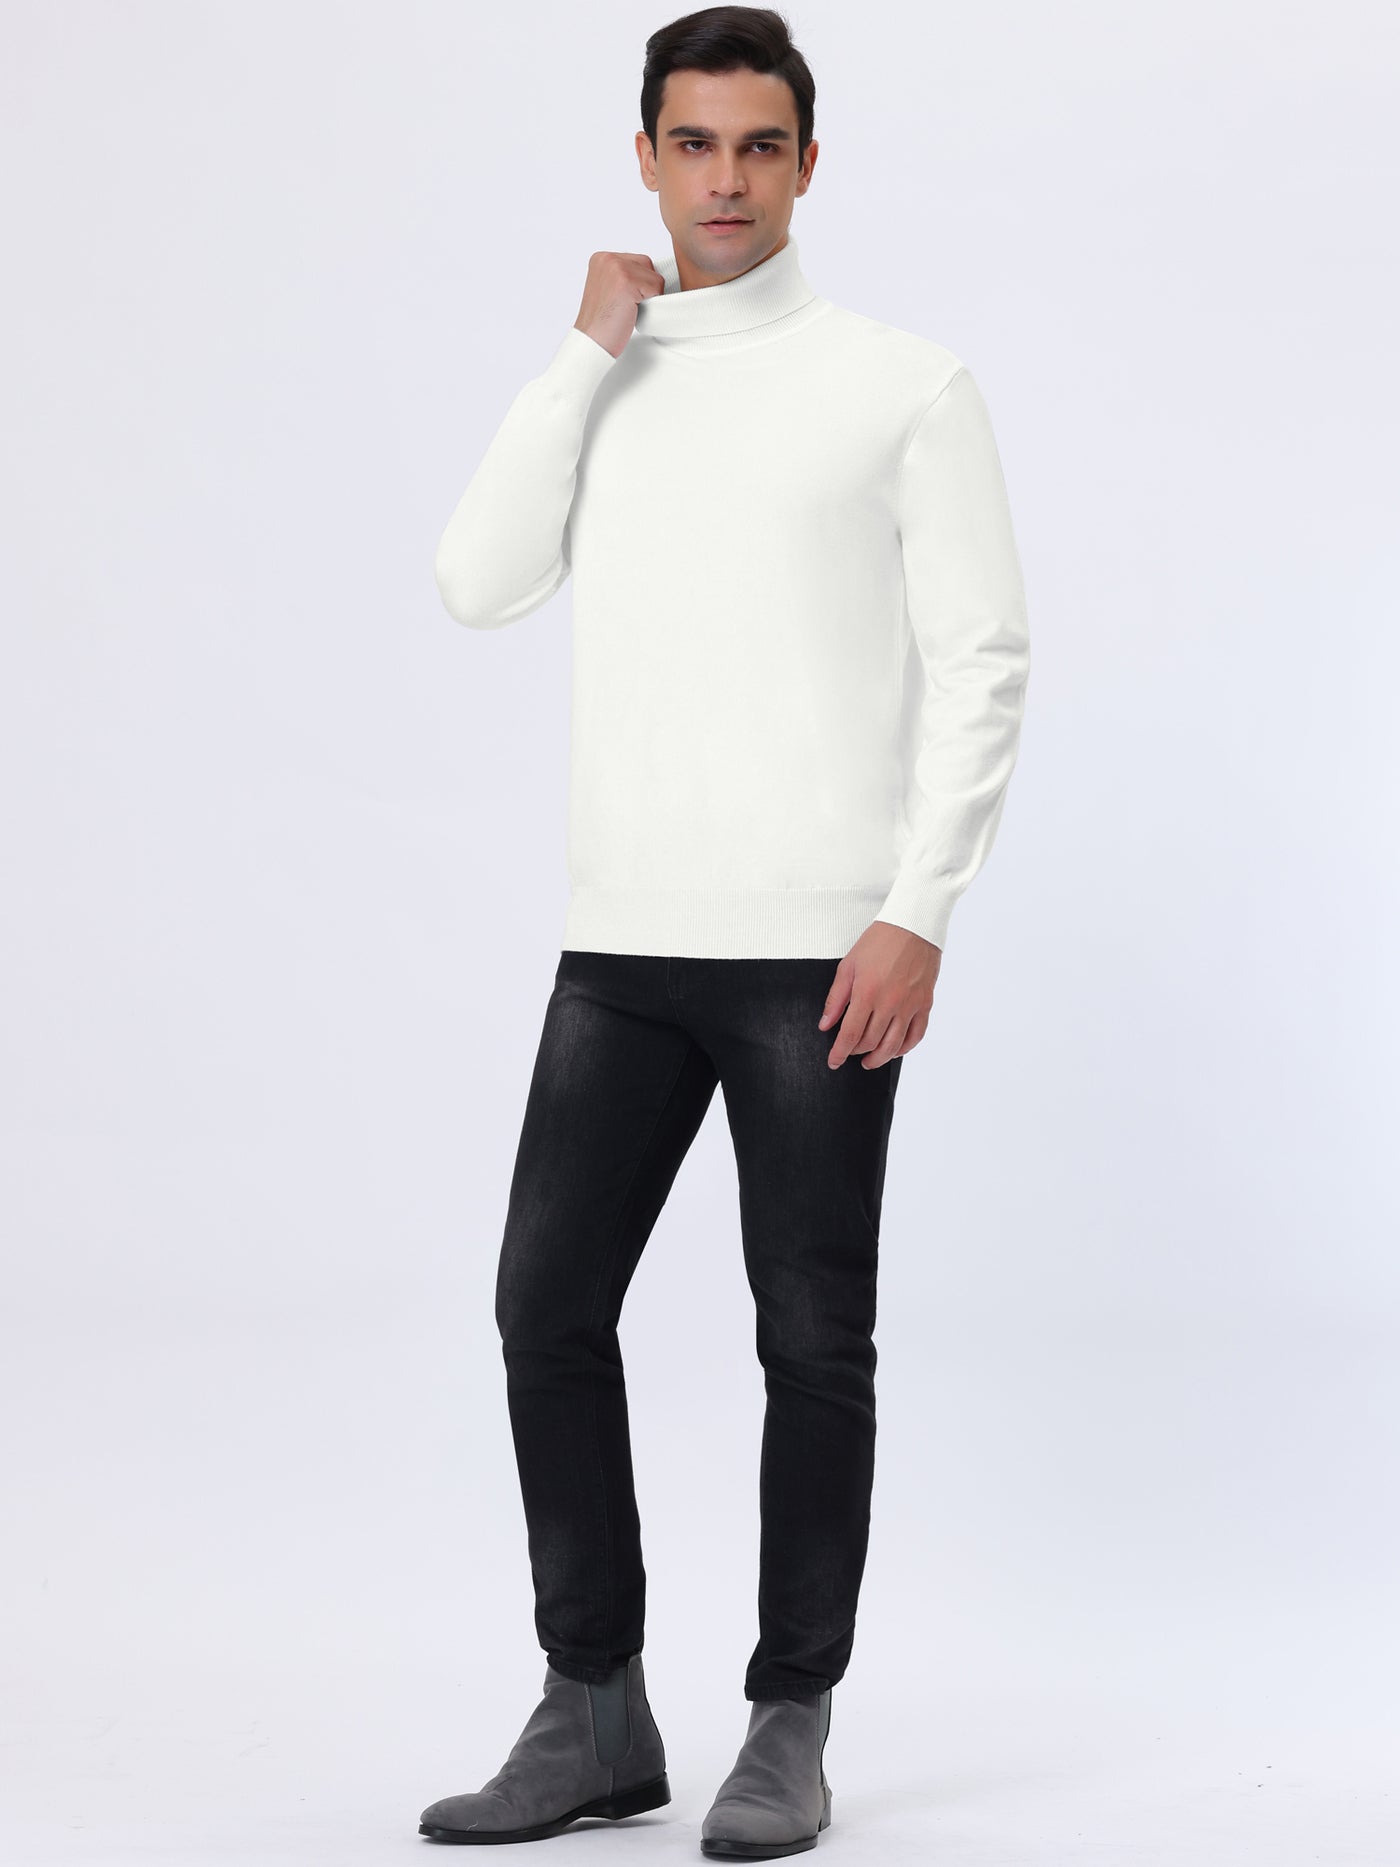 Bublédon Men's Turtleneck Sweater Long Sleeves Solid Color Casual Knitted Jumpers